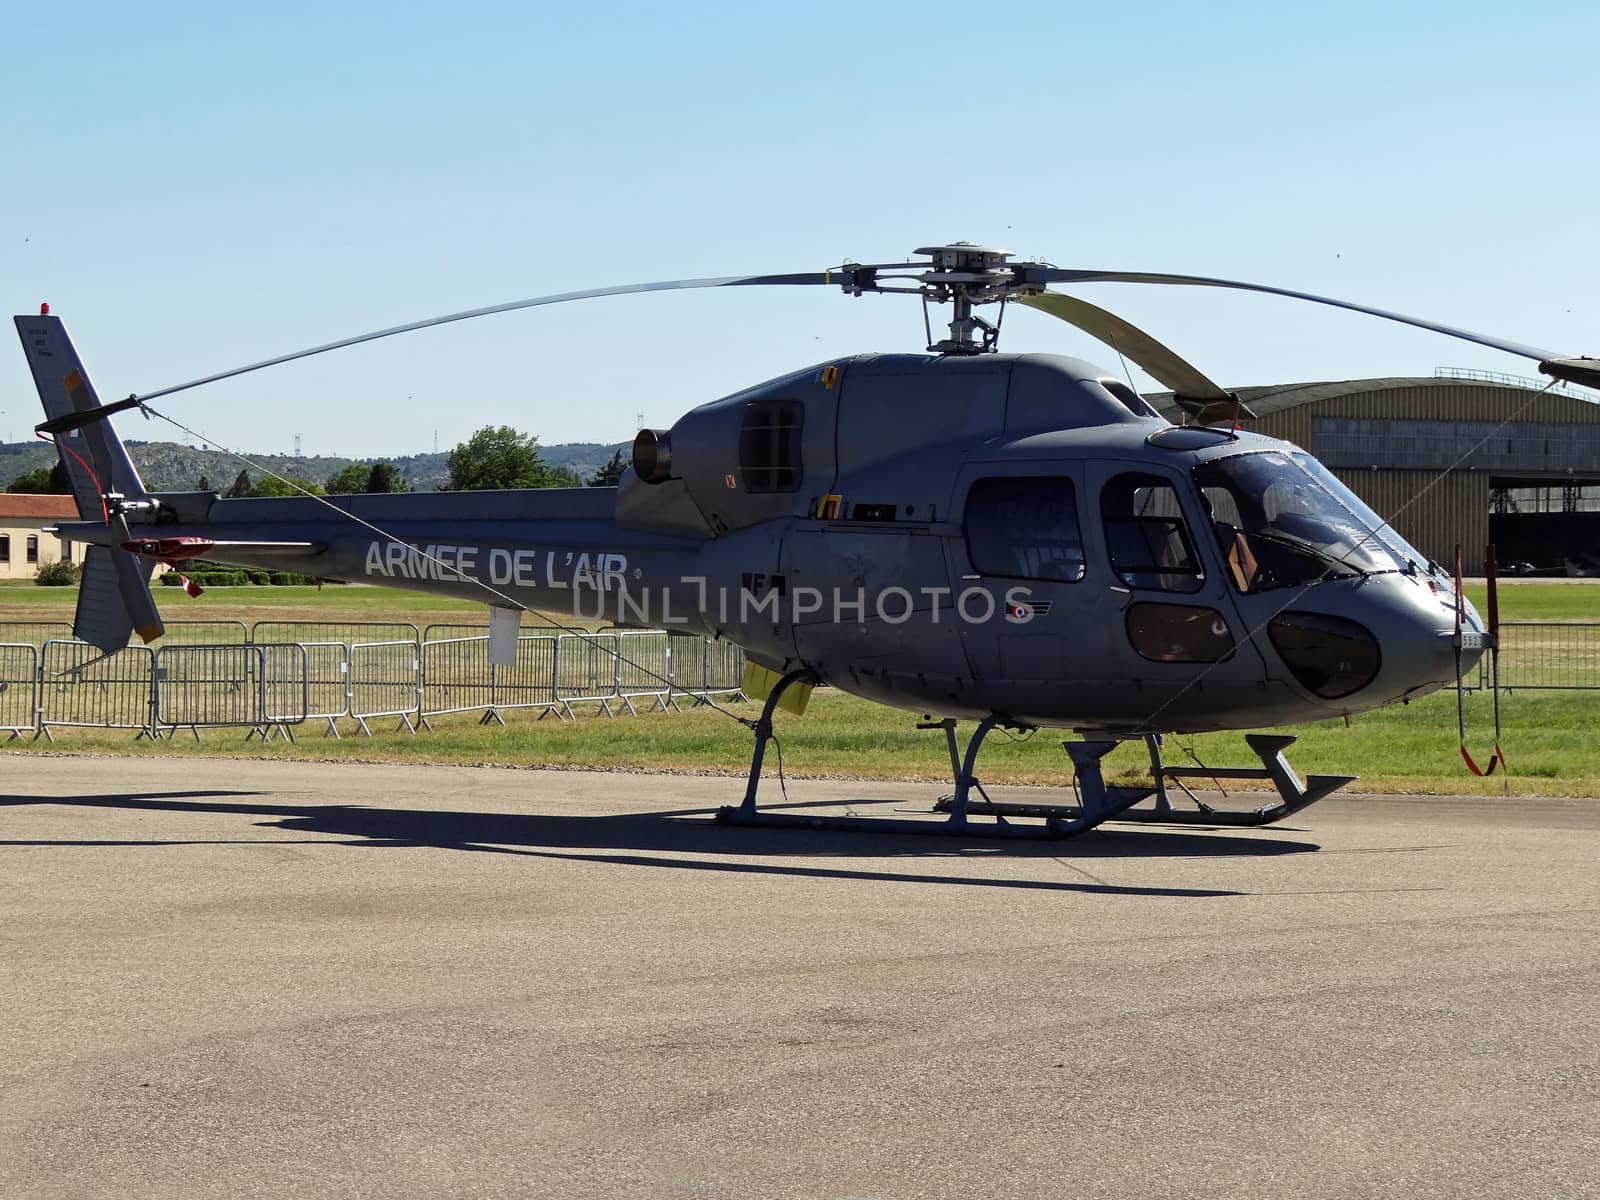 french army helicopter at an airshow in france